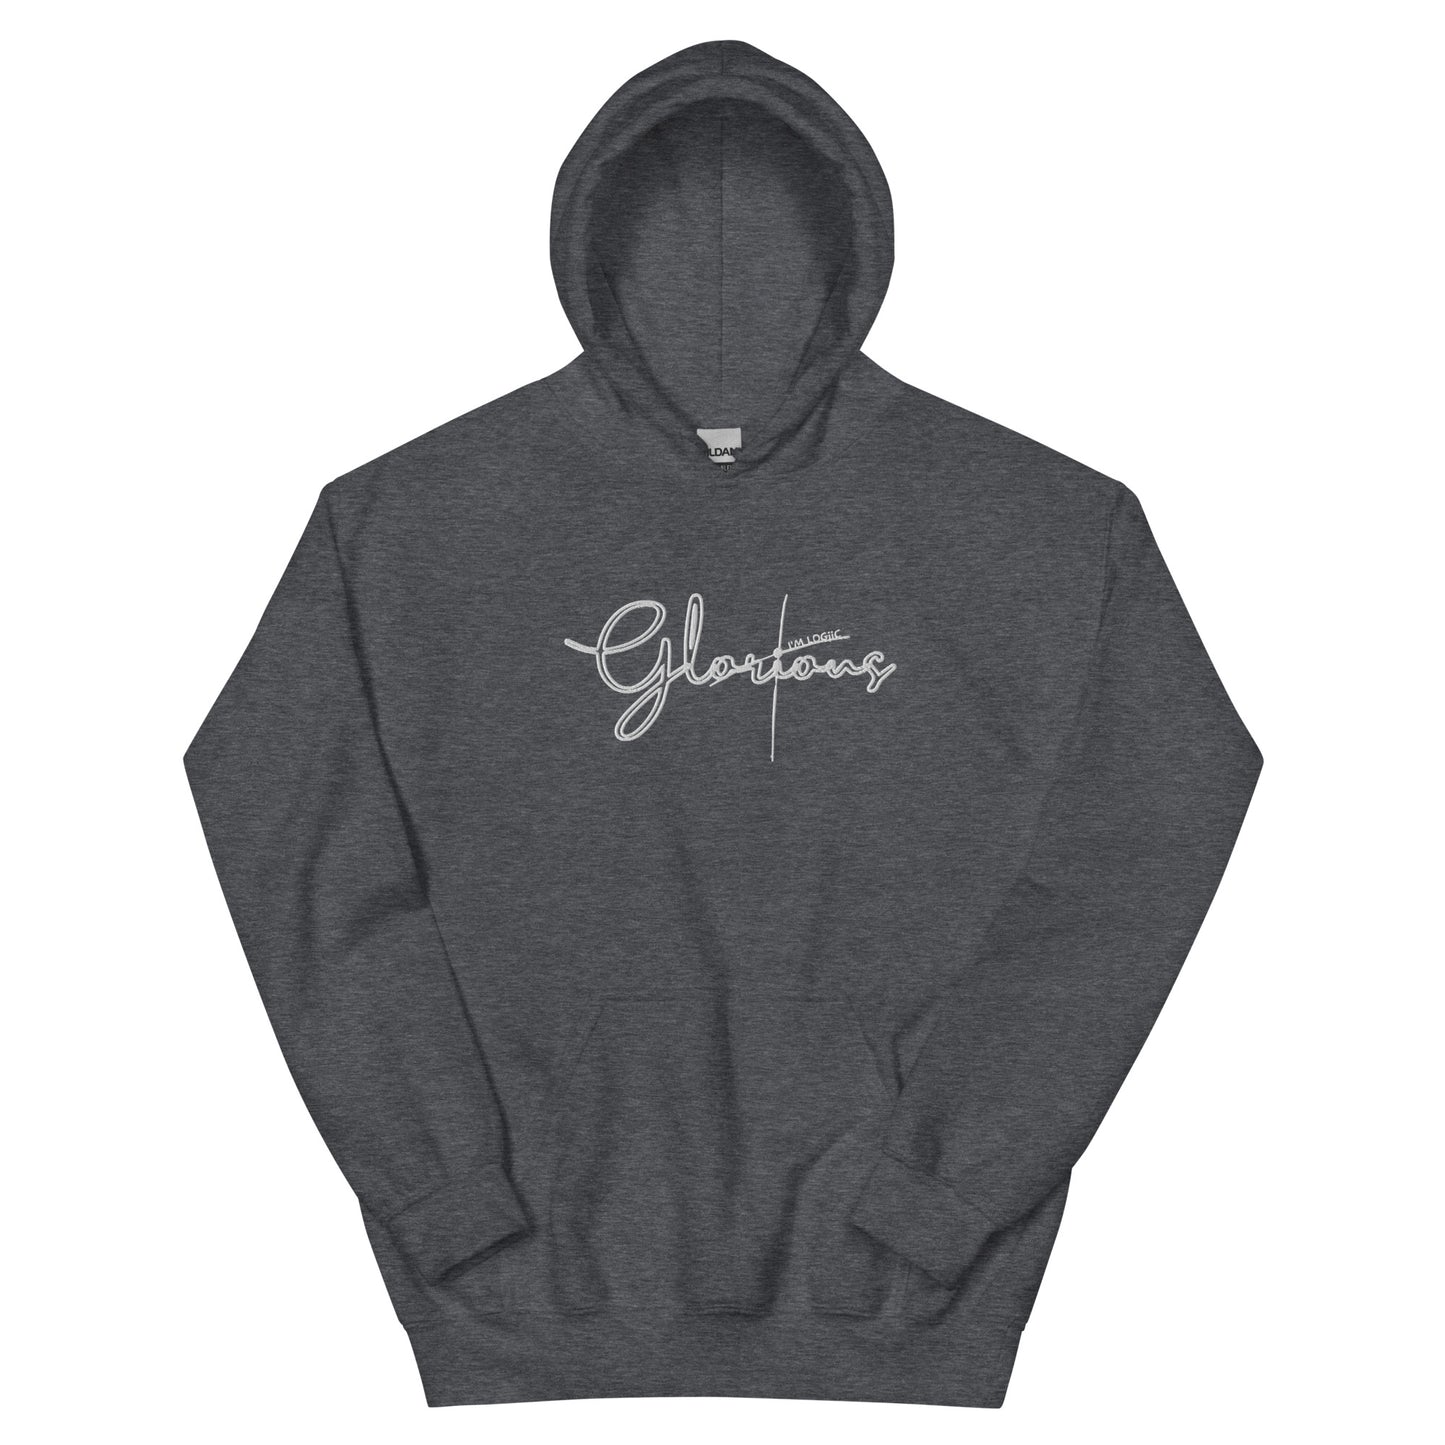 Glorious Embroidered Vintage Hoodie - Grey / S - Shirts &